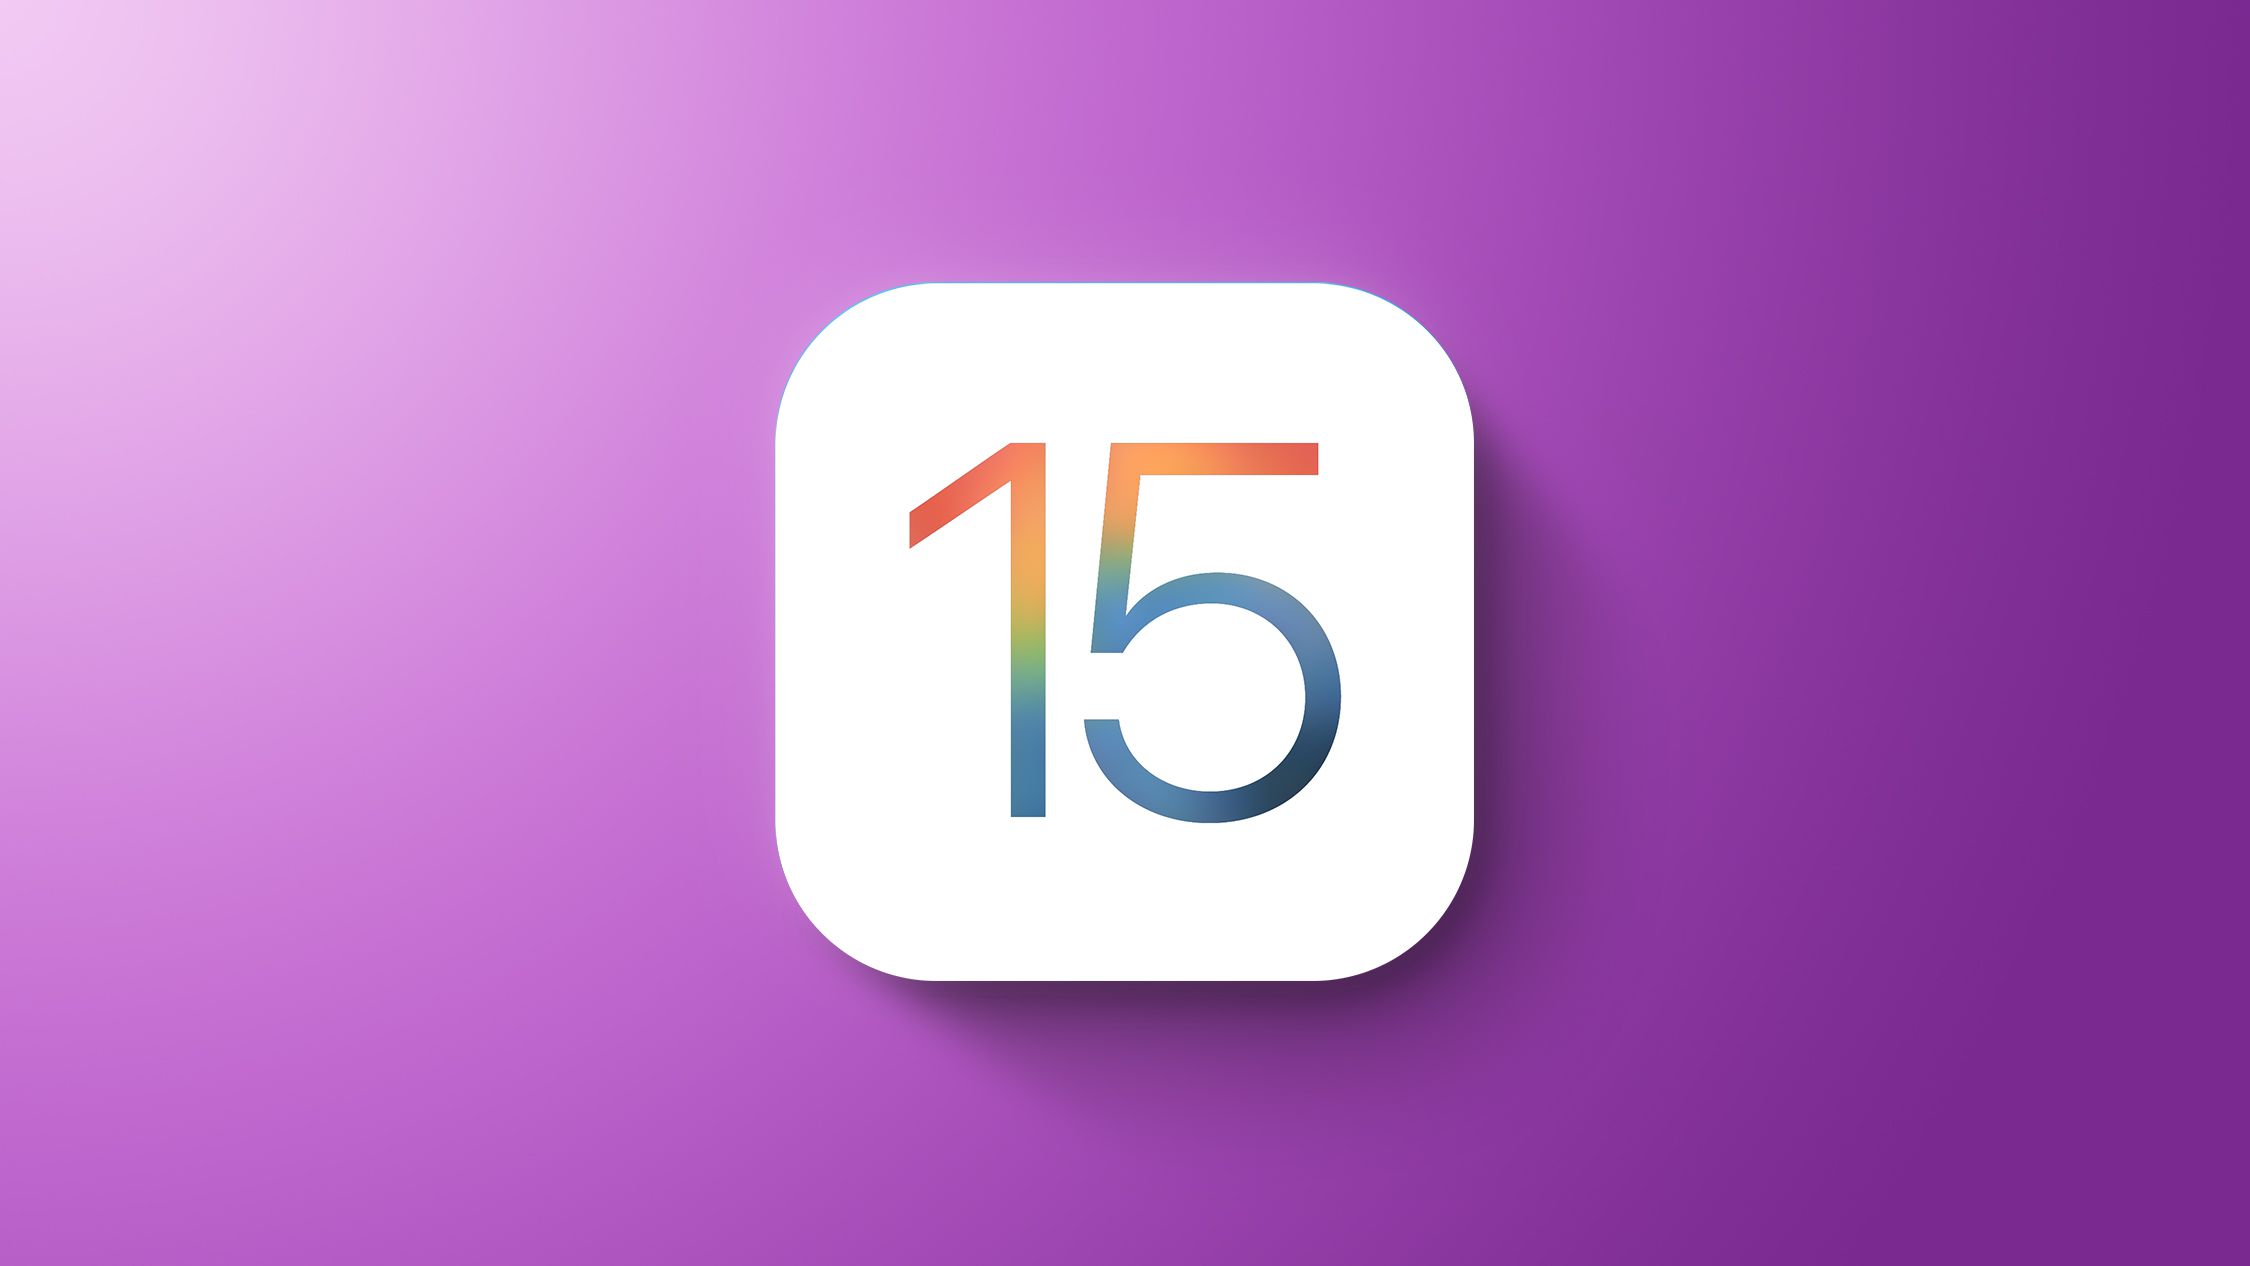 IOS 15.3 beta leaks with only minor changes as Apple prepares for more feature-rich updates in the spring [Updated]